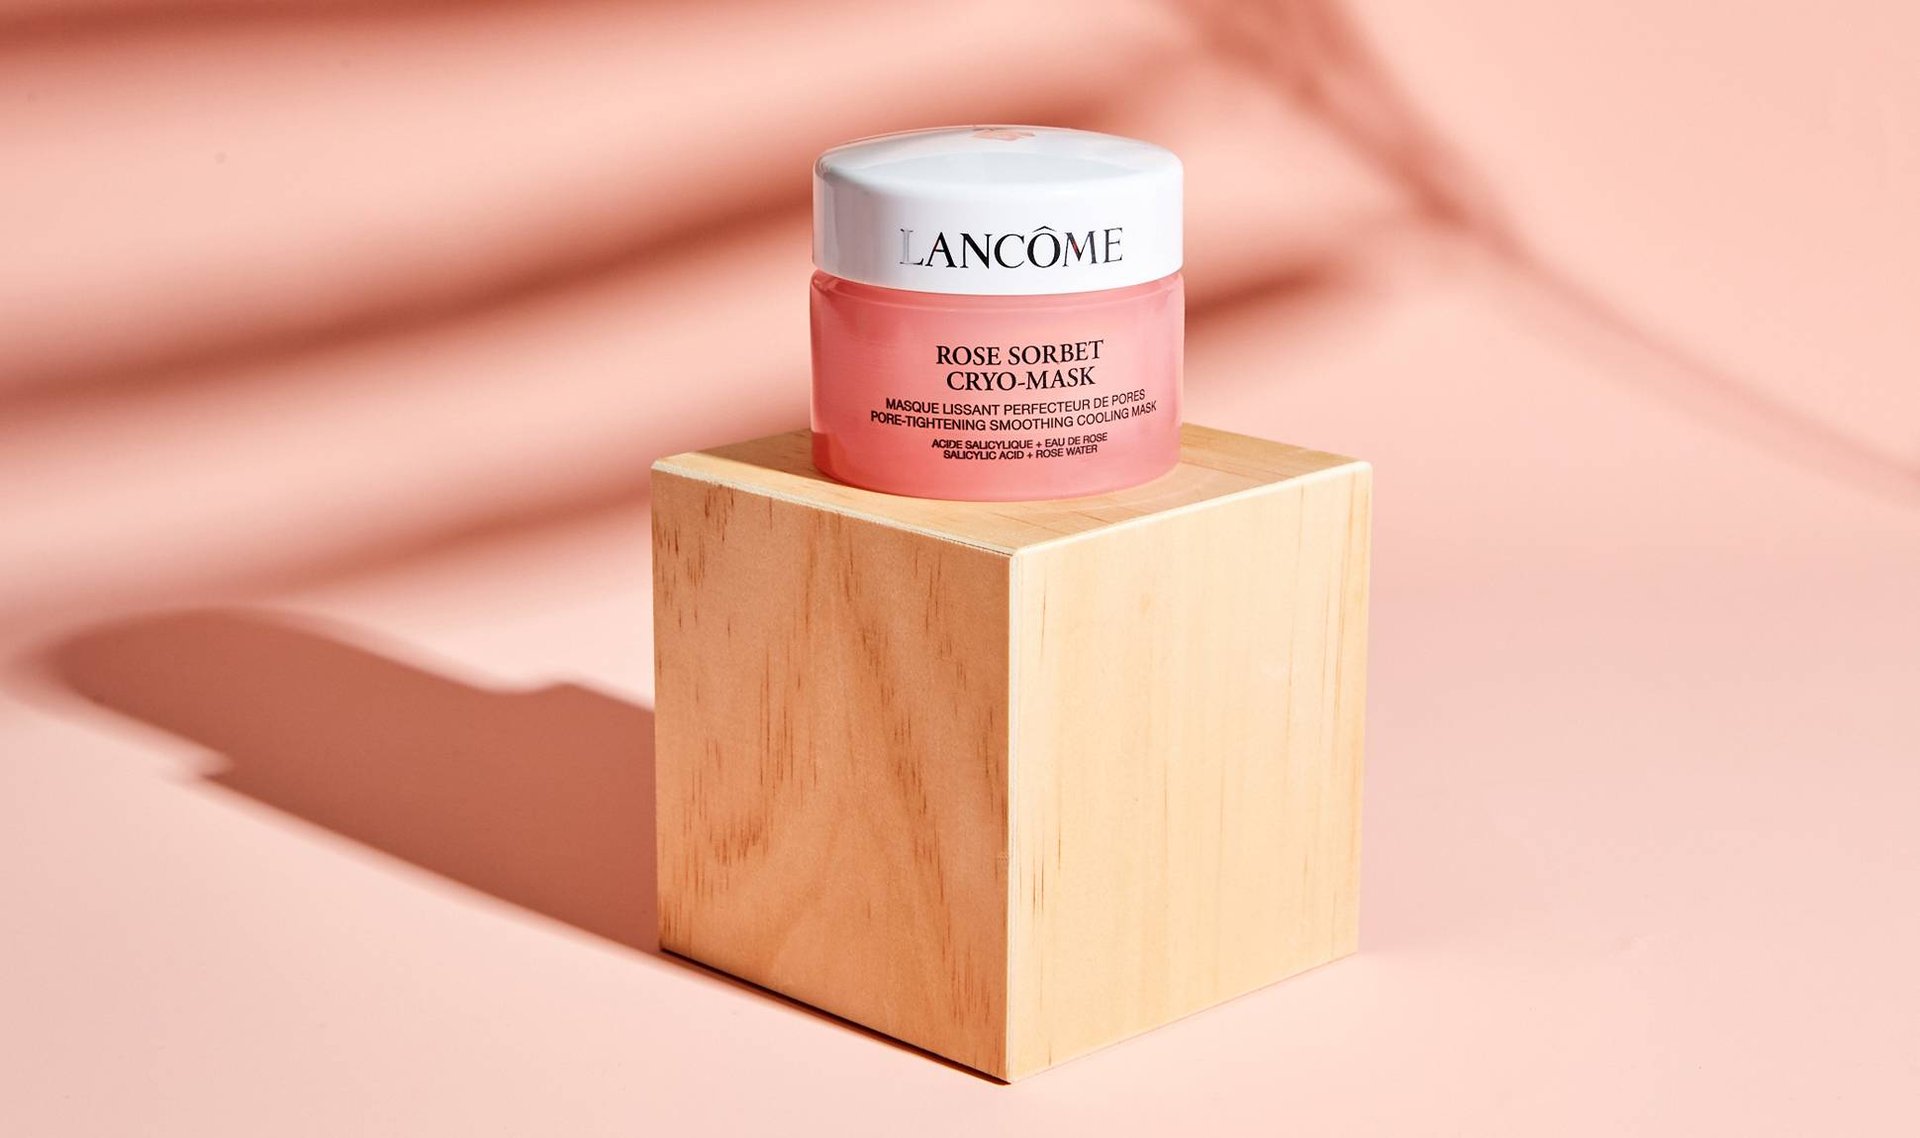 Does the Lancôme Rose Sorbet Cryo Mask Really Make Pores Look Smaller? We Put It to the Test